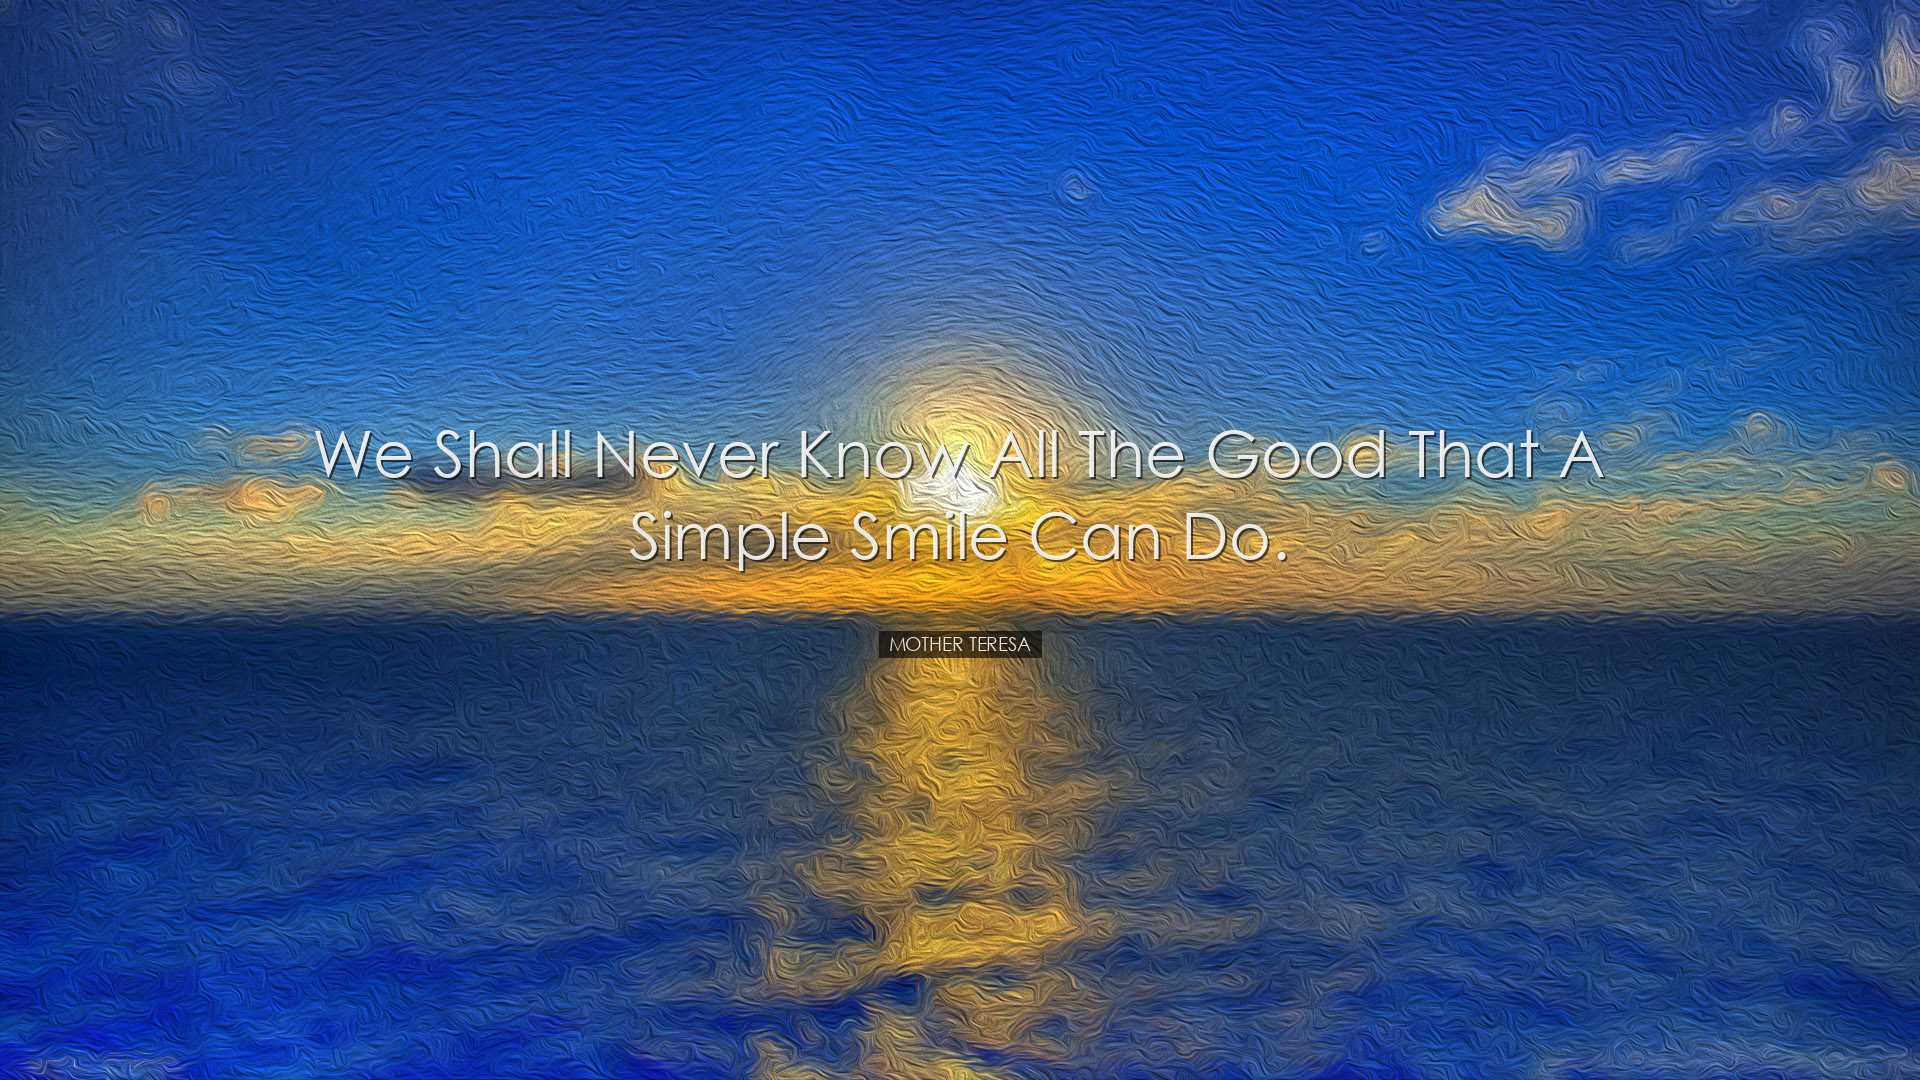 We shall never know all the good that a simple smile can do. - Mot